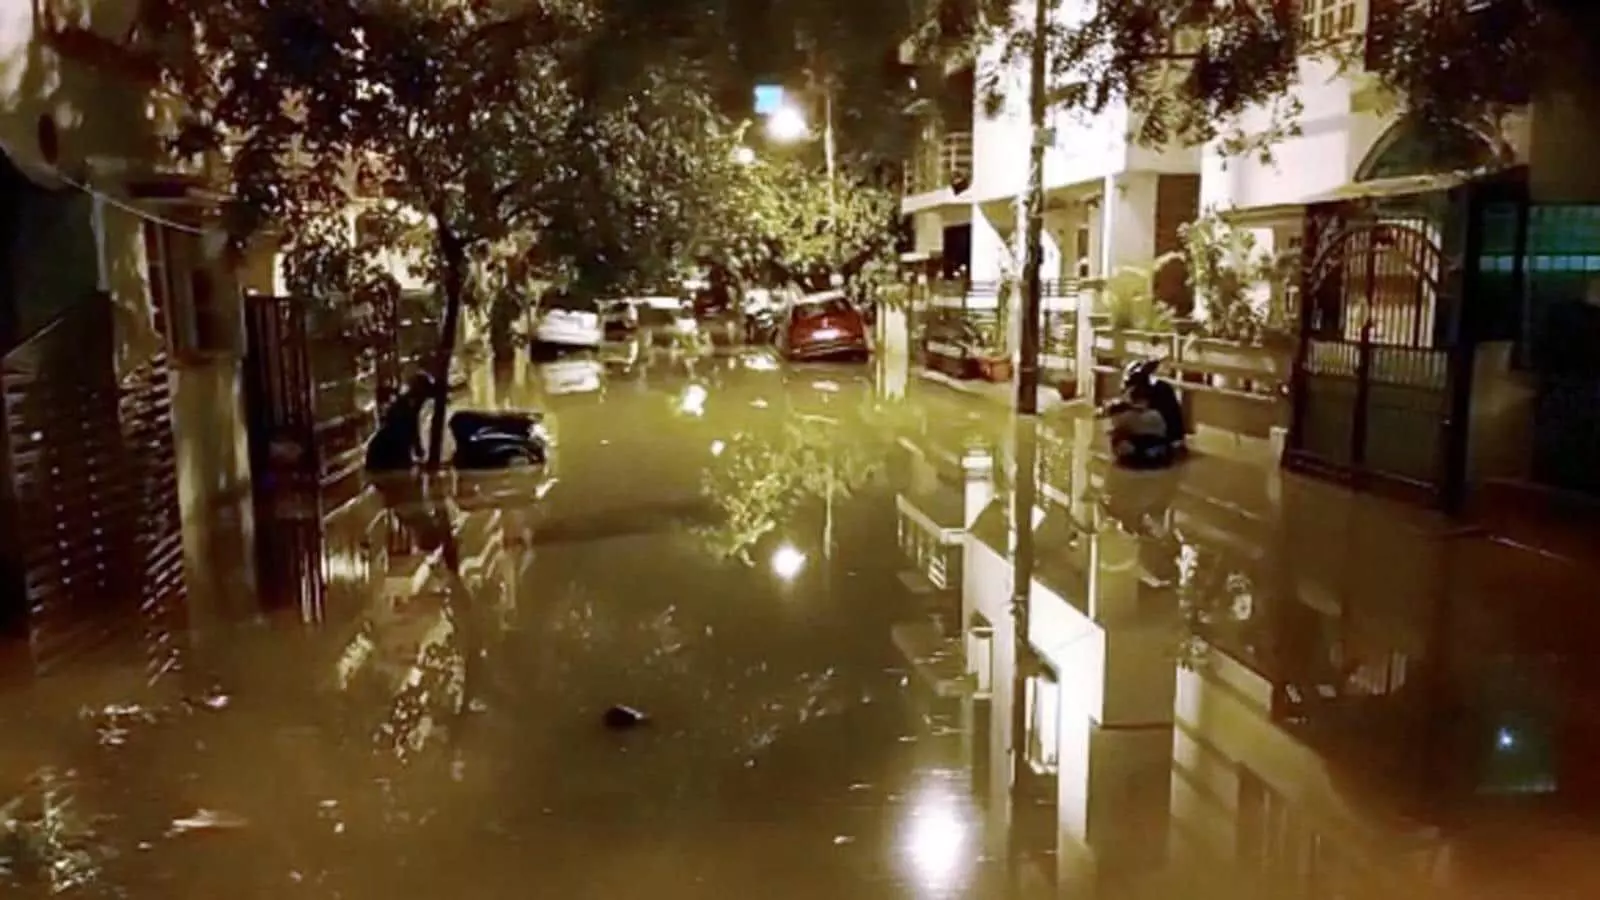 Bengaluru roads waterlogged, several areas submerged as downpour wreaks havoc in city